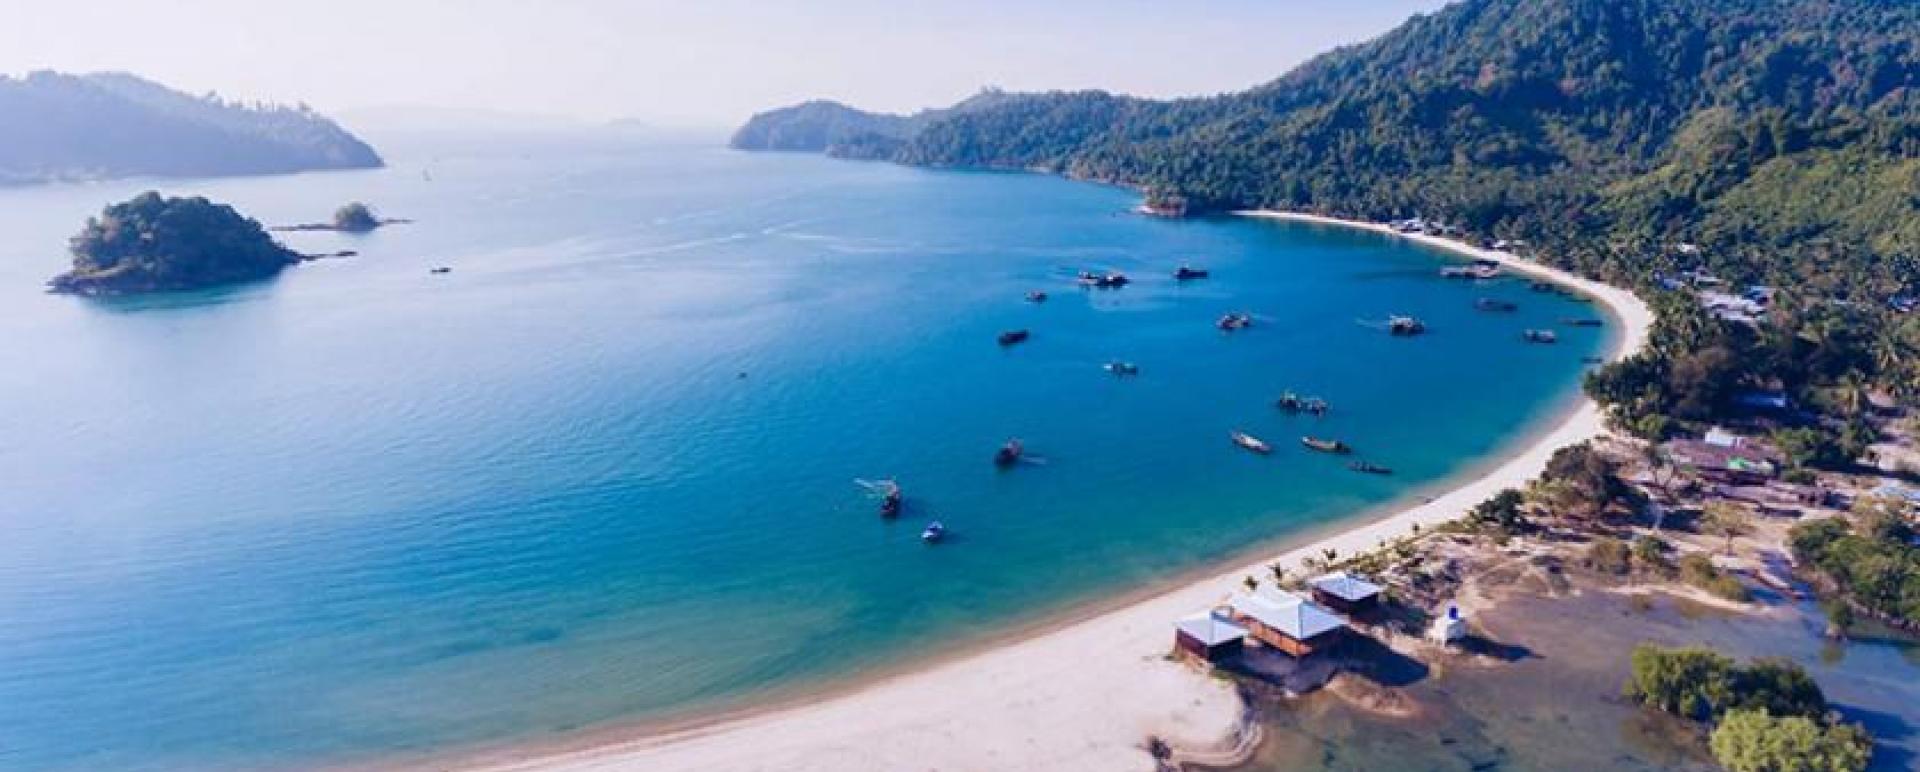 The first Myanmar’s community-based tourism (CBT) island opened at Don Nyaung Hmaing village in Kyunsu Township, Tanintharyi Region